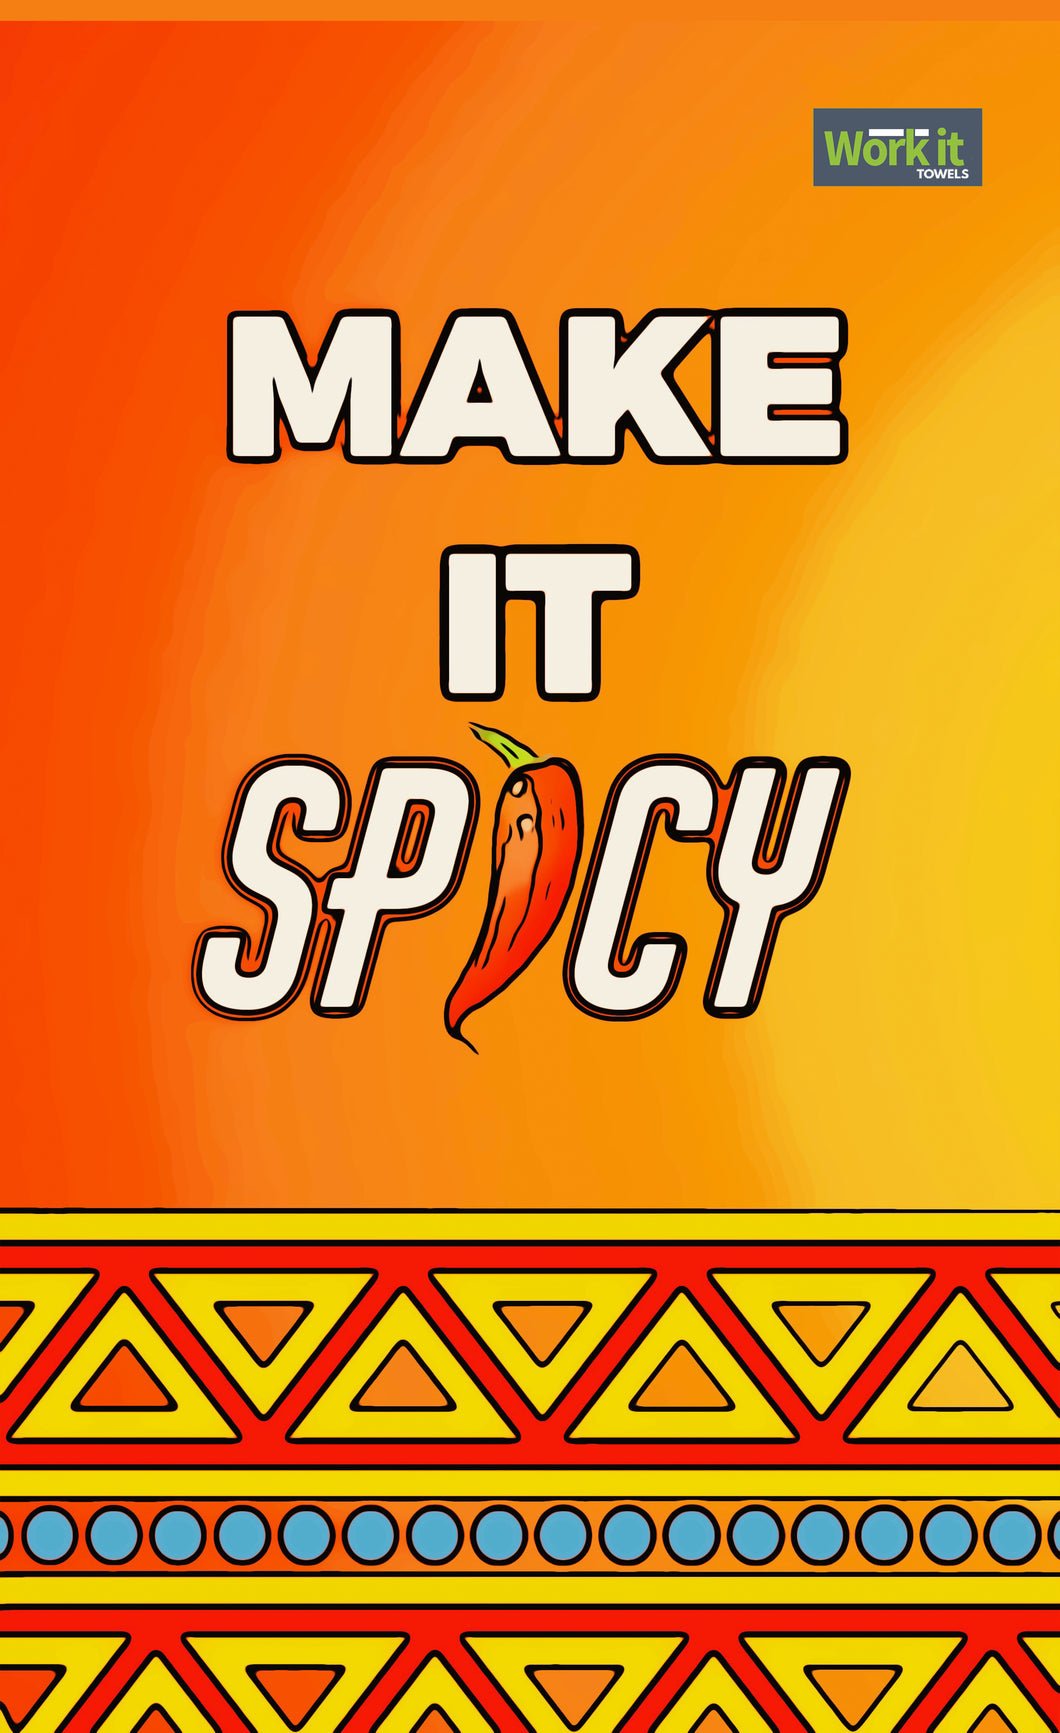 Make It Spicy - work it towels